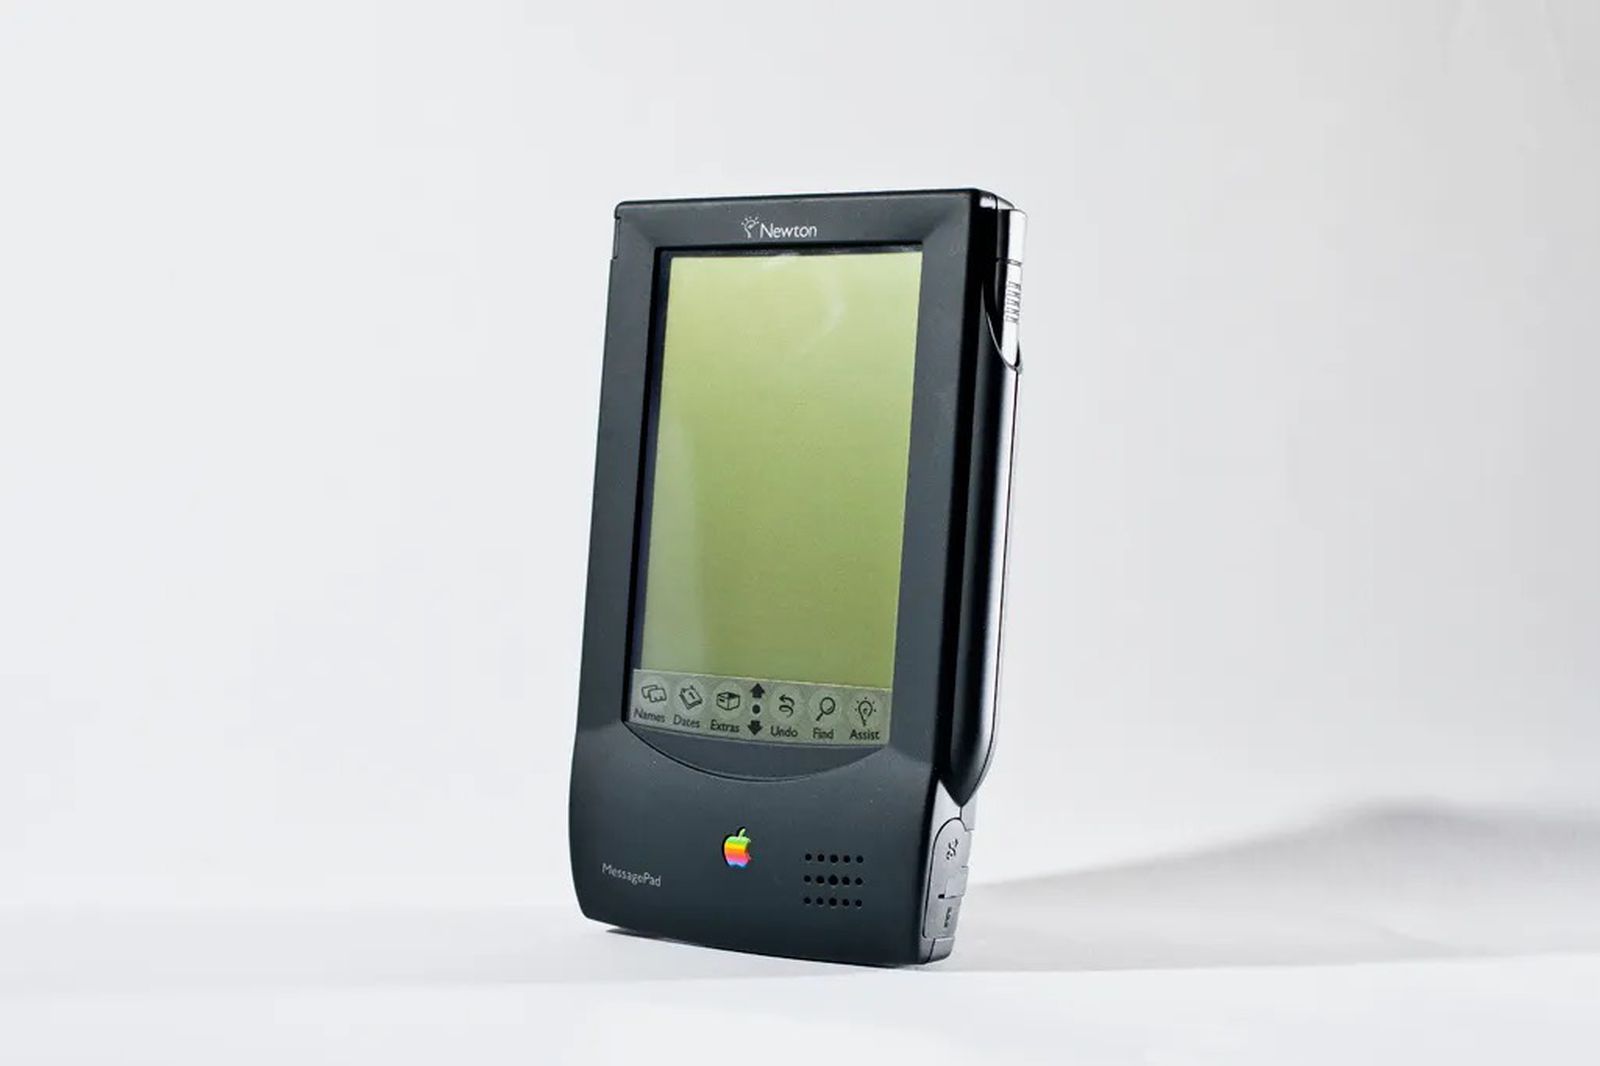 Apple Discontinued the Newton 25 Years Ago Today - macrumors.com